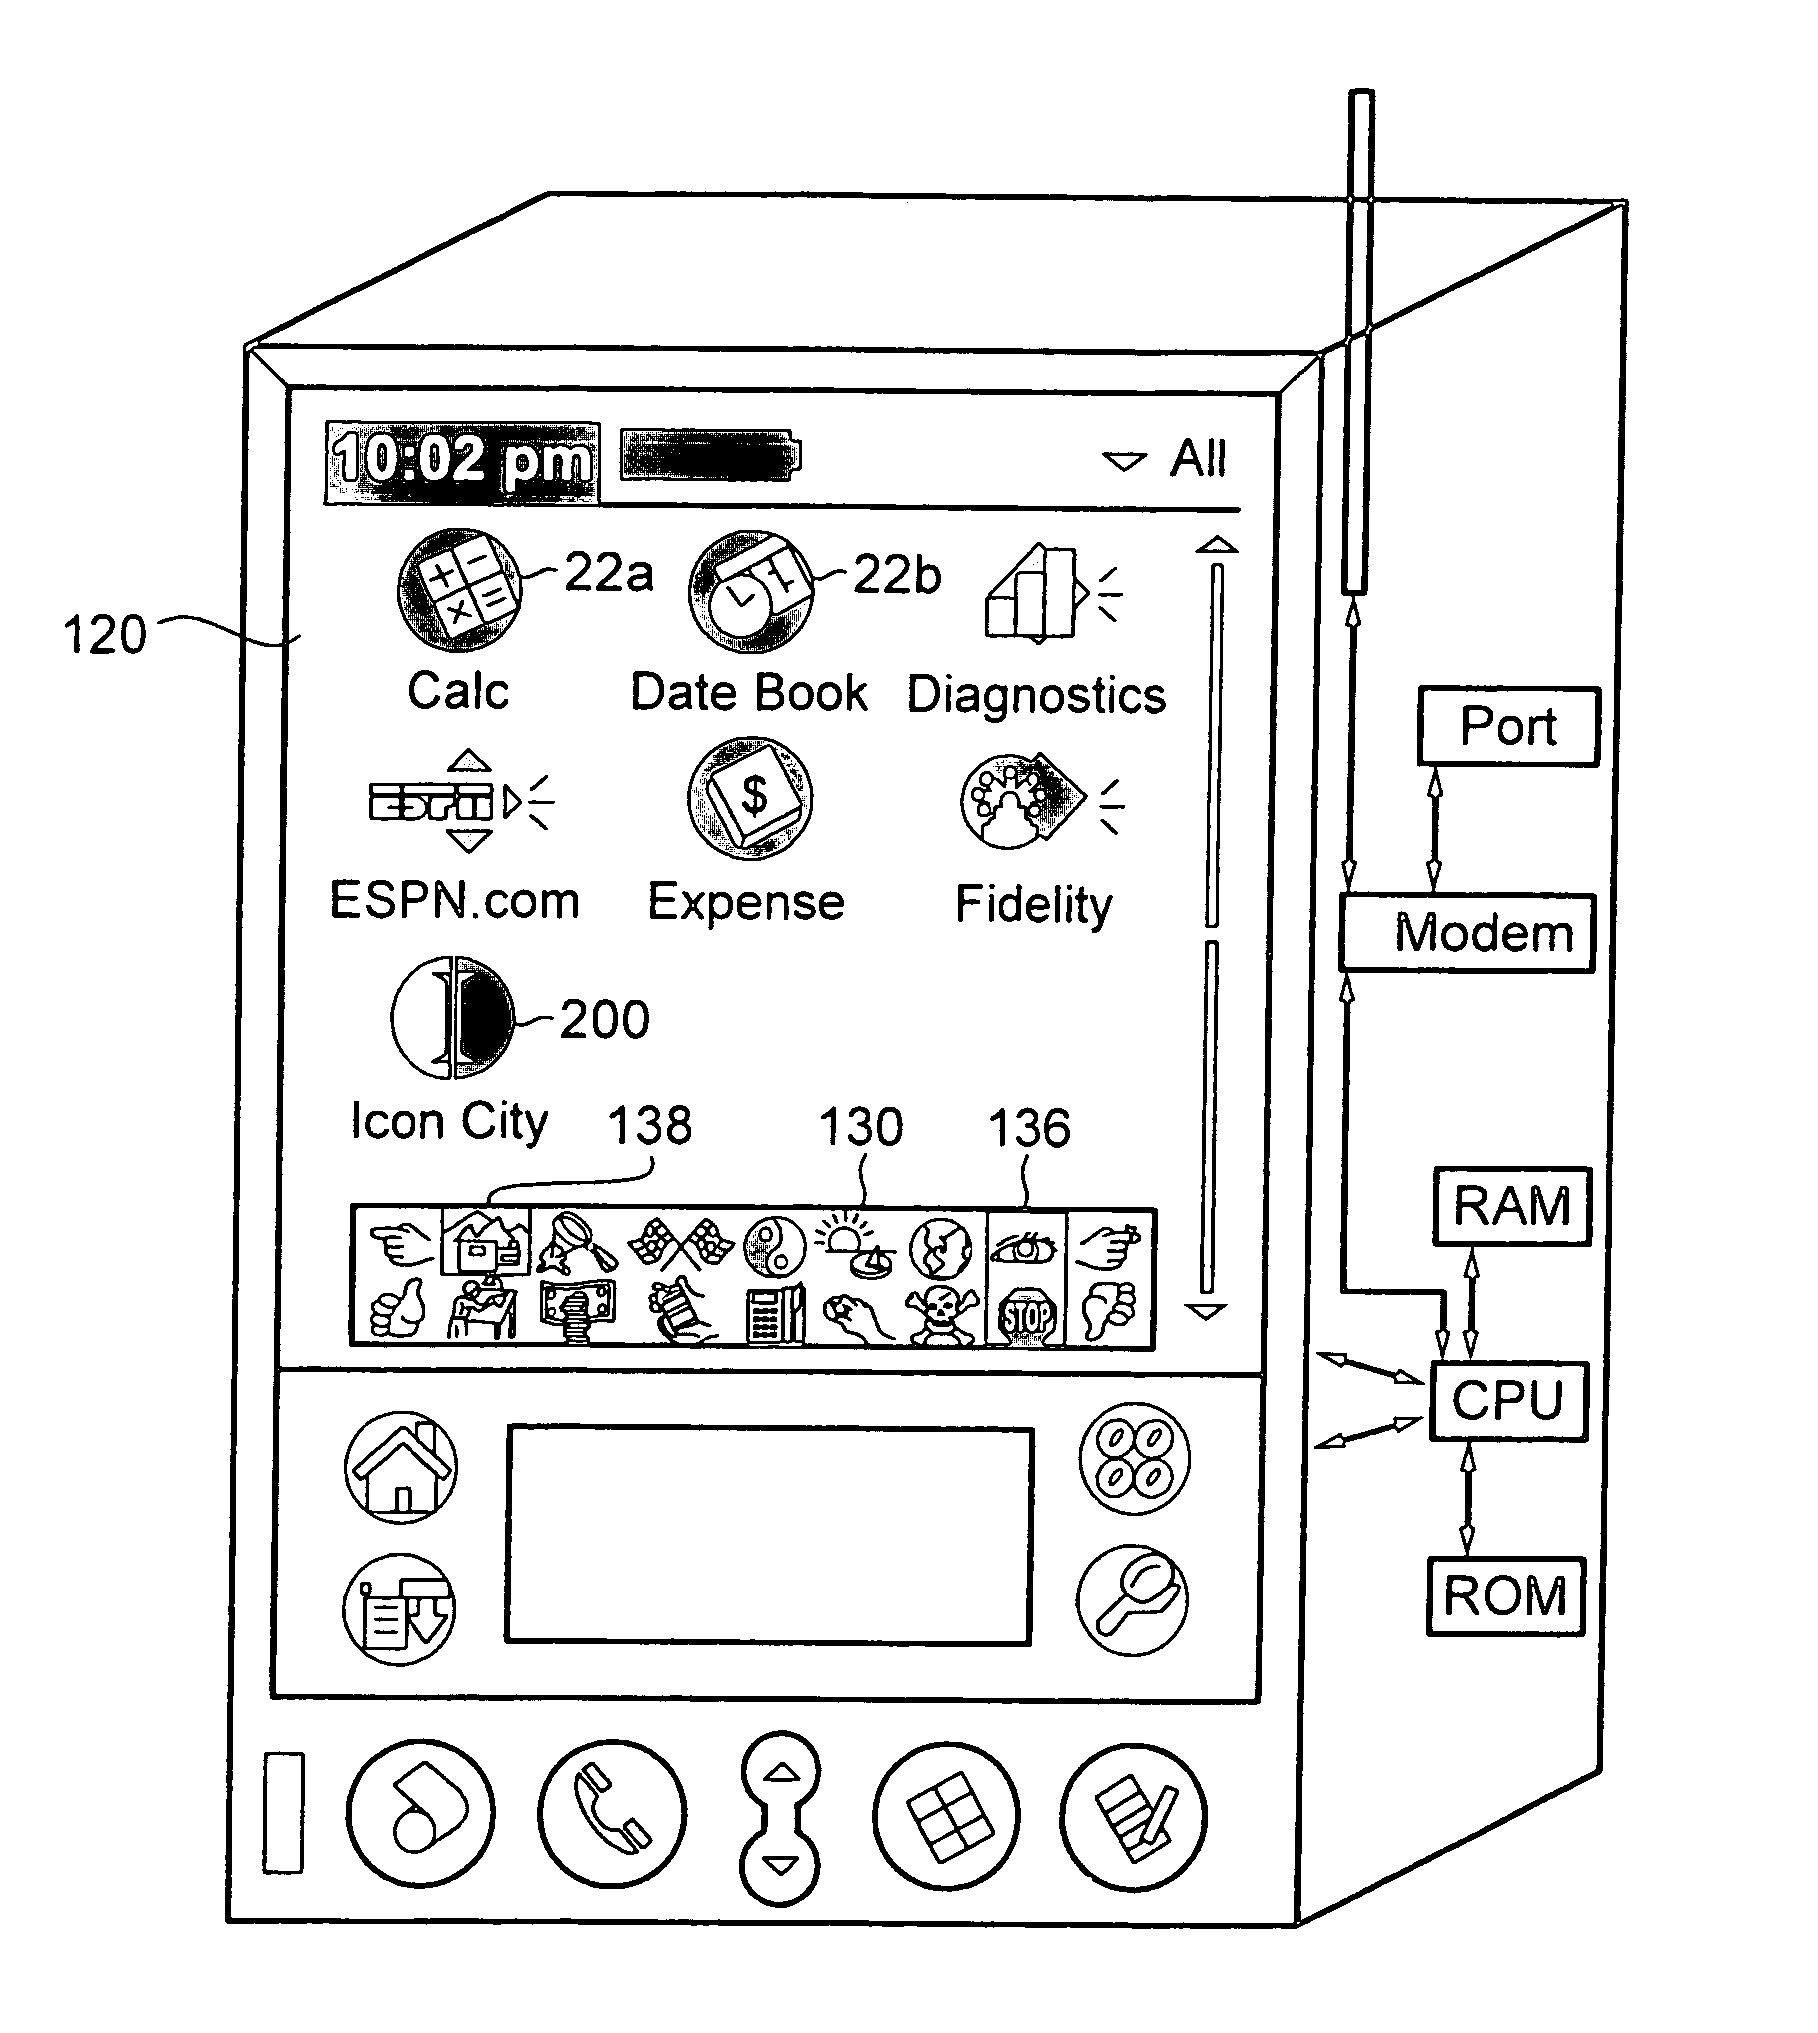 Computer device, method and article of manufacture for utilizing sequenced symbols to enable programmed application and commands